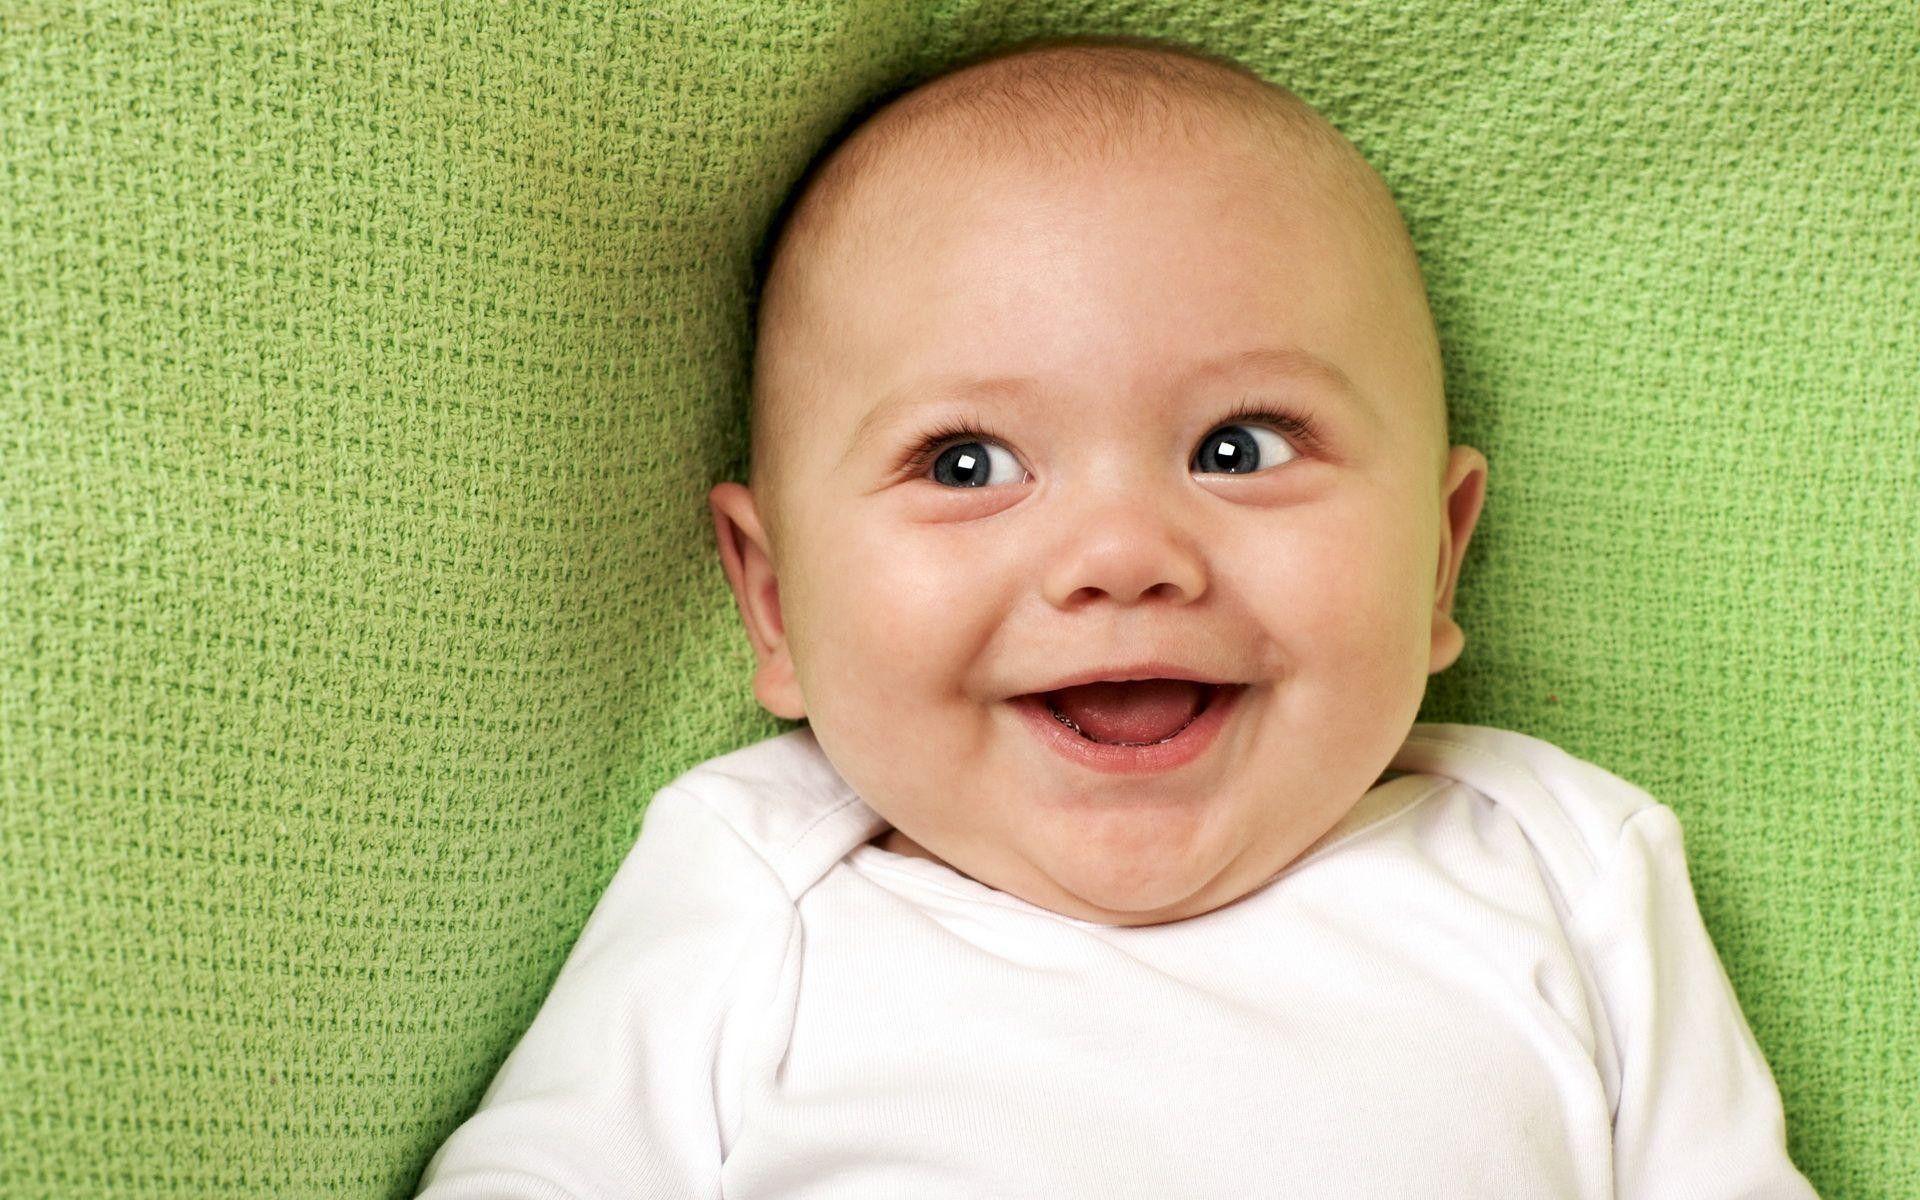 laughing baby pictures wallpaper